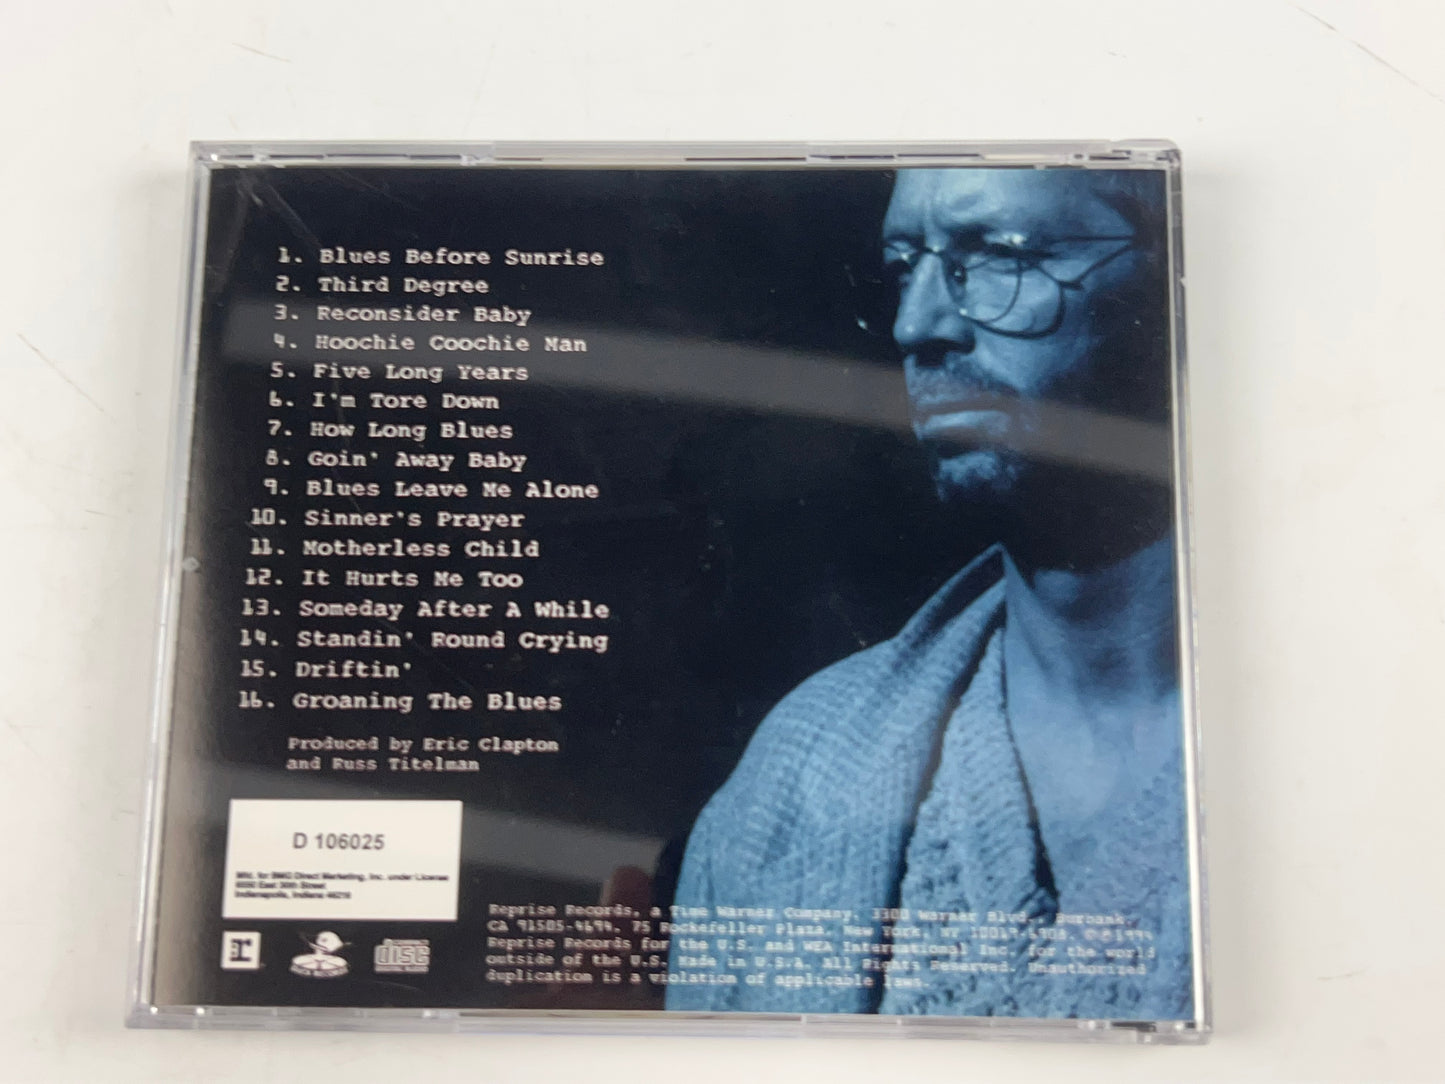 From the Cradle by Eric Clapton (CD, 1994)